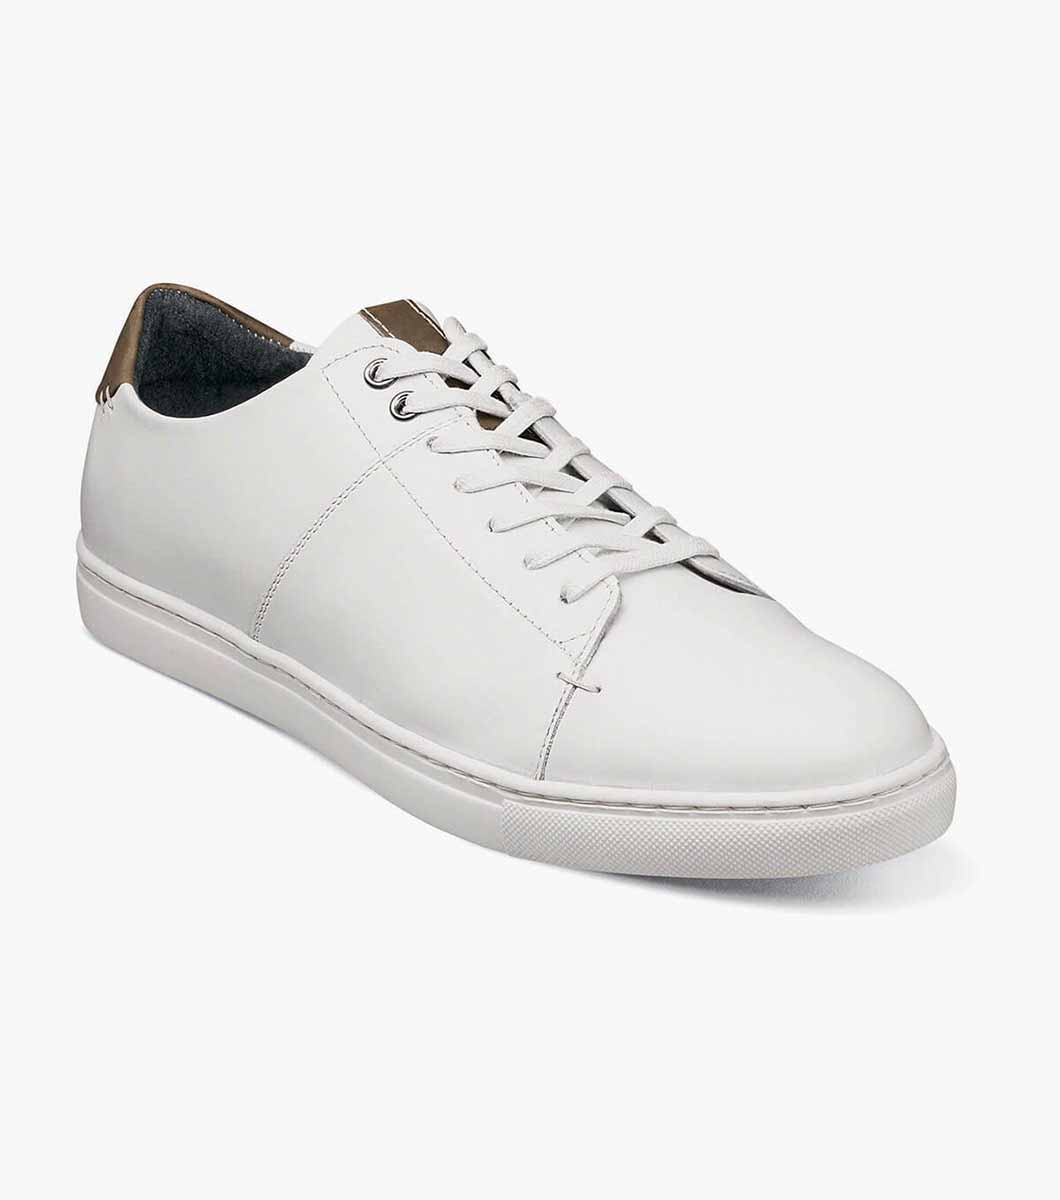 Watts Lace Up Oxford Men's Casual Shoes 